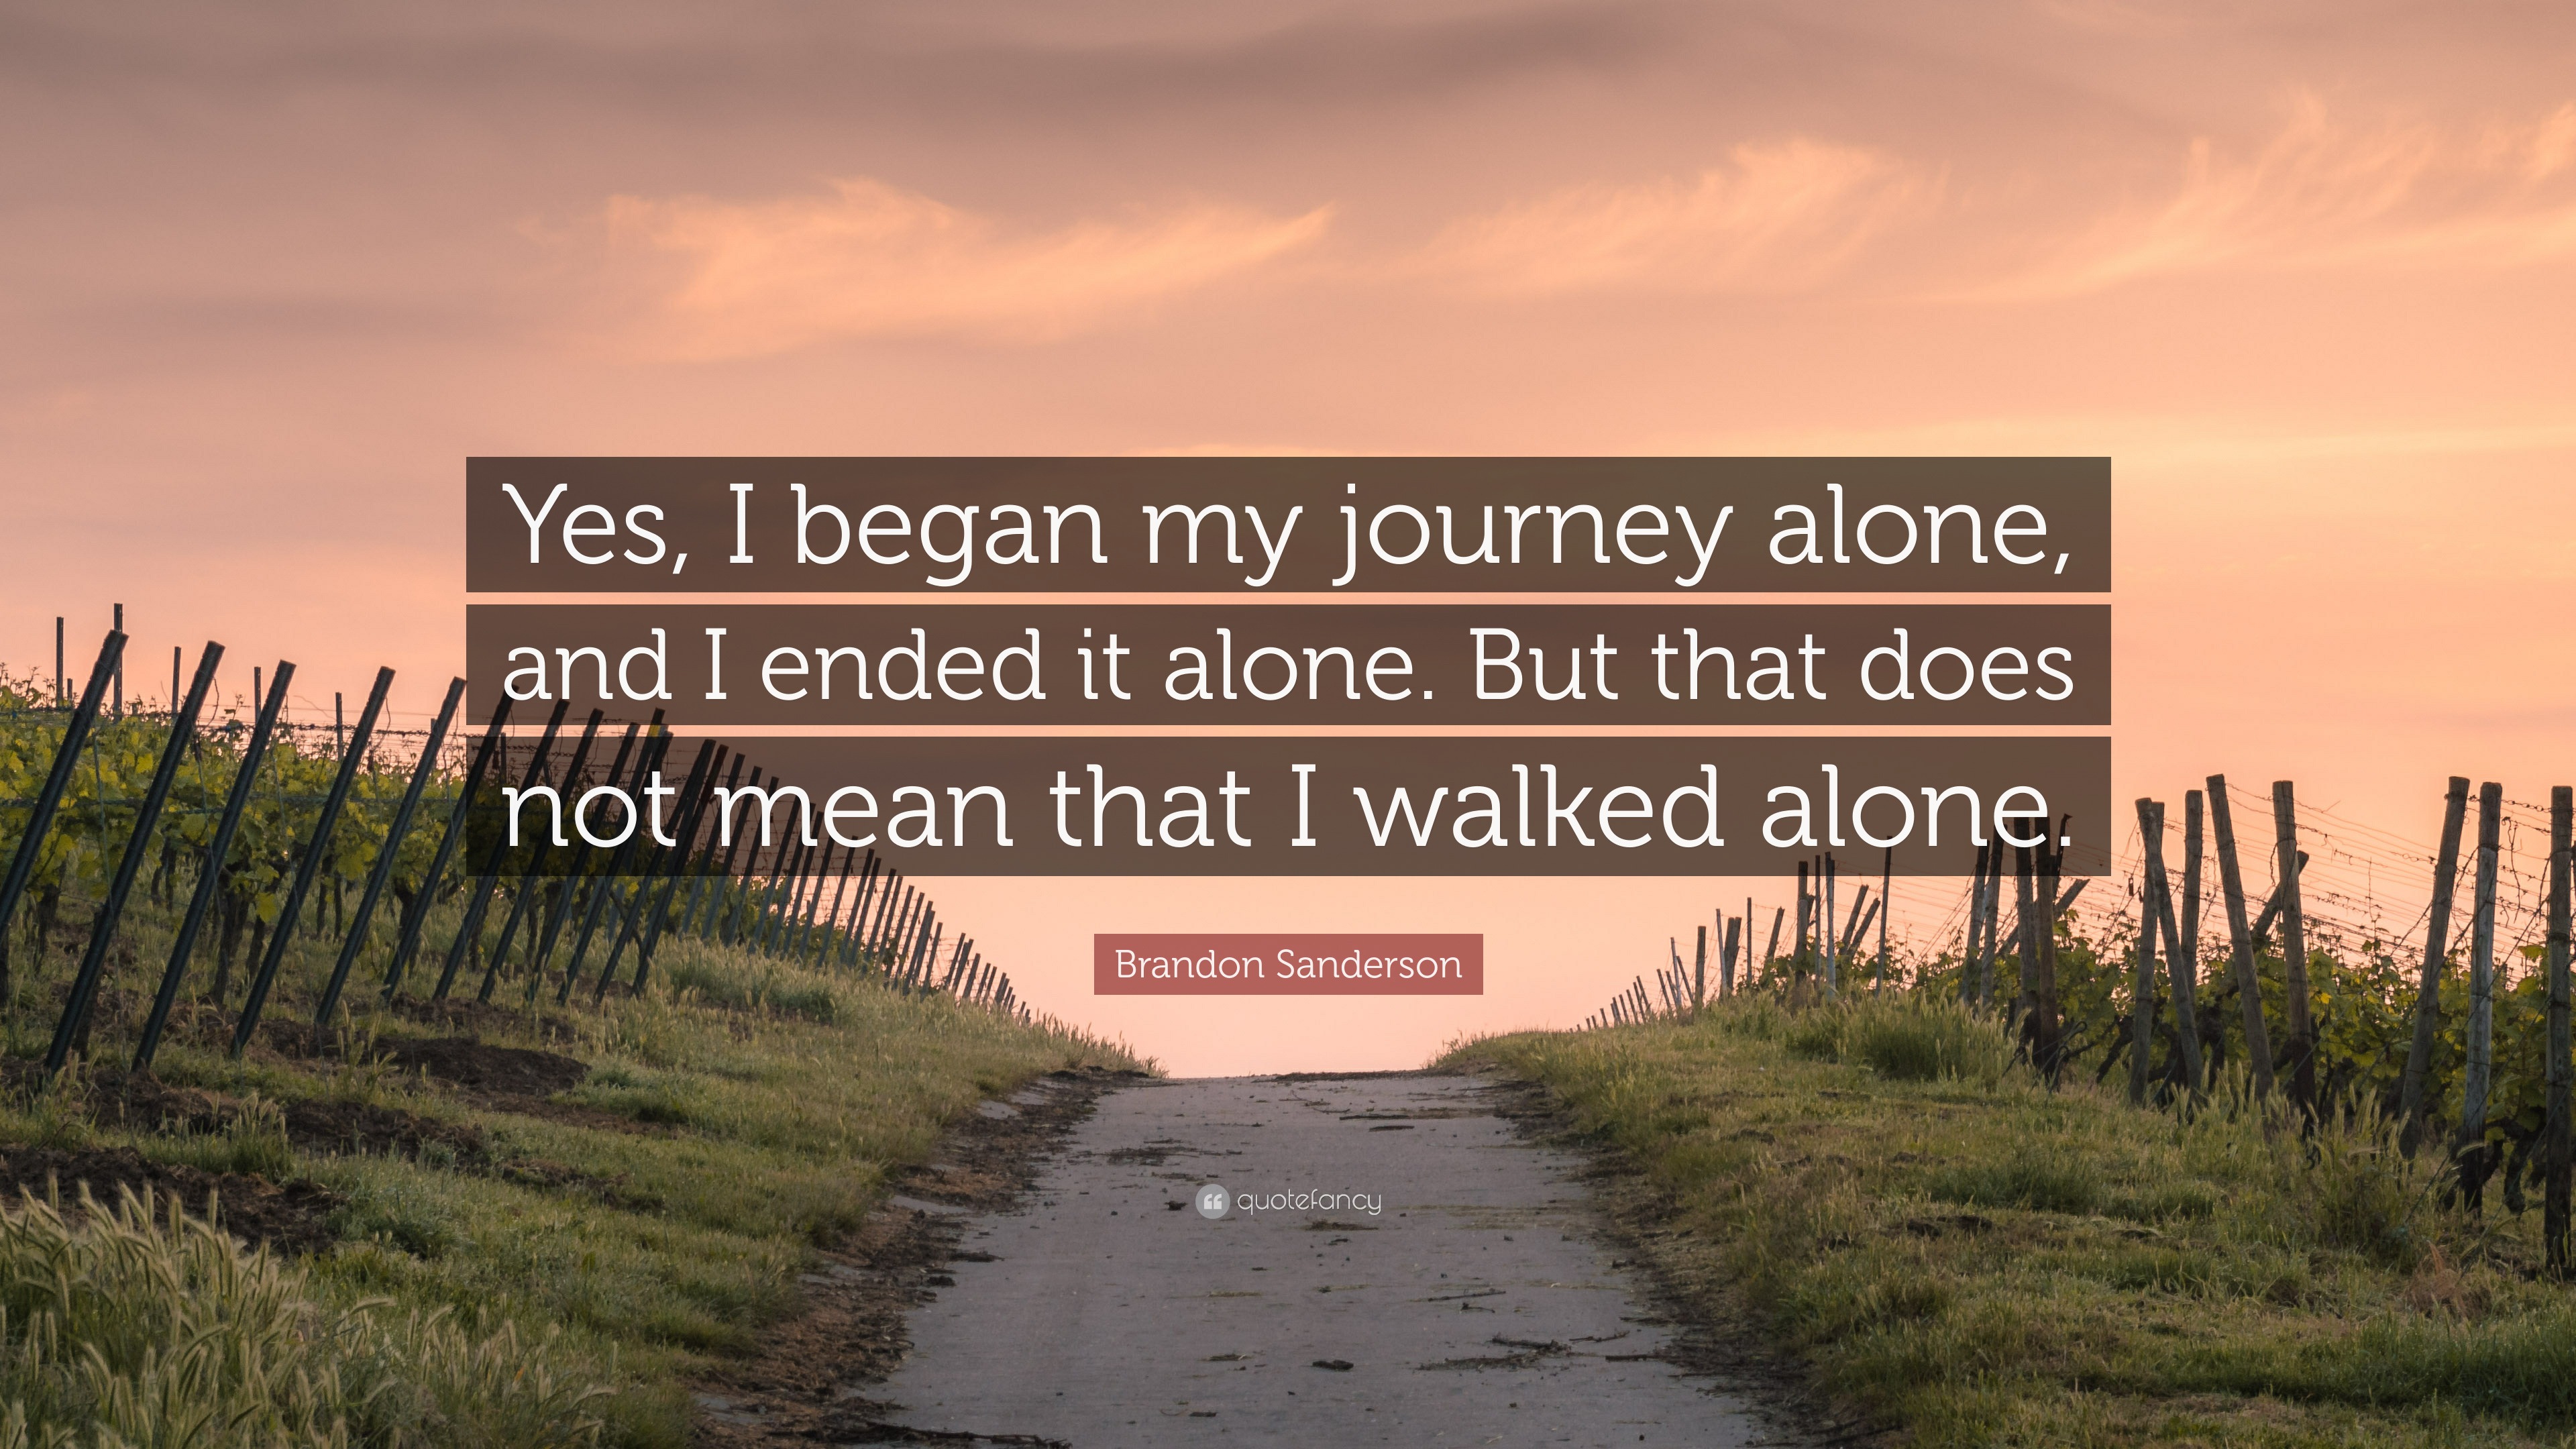 https://quotefancy.com/media/wallpaper/3840x2160/6651850-Brandon-Sanderson-Quote-Yes-I-began-my-journey-alone-and-I-ended.jpg